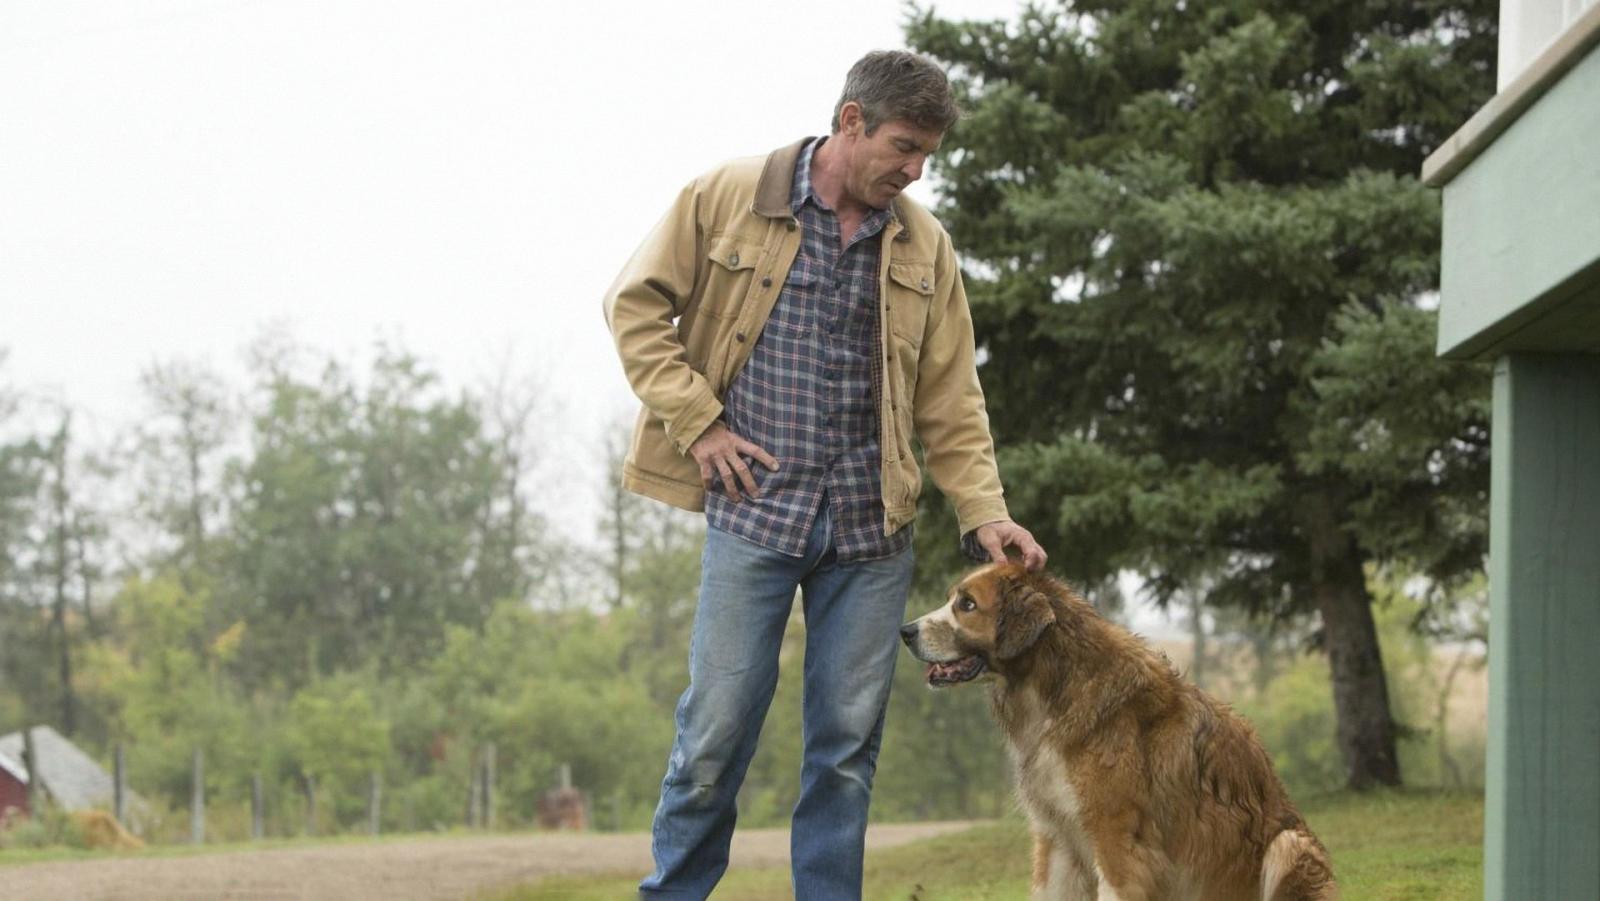 5 Saddest Movies For Dog Lovers to Avoid (Unless You Want to Cry) - image 4